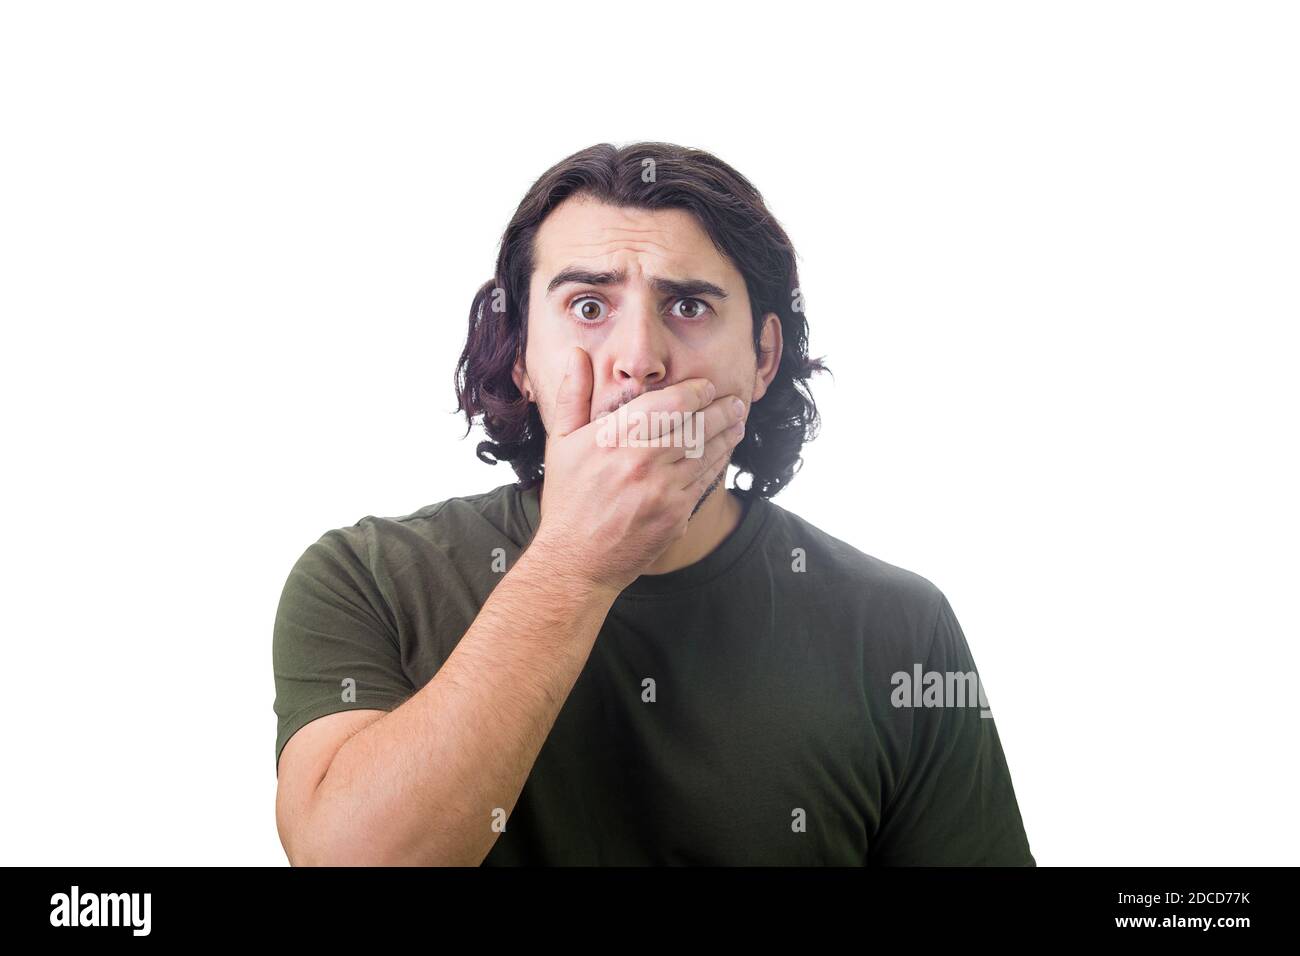 Portrait of shocked young man, long curly hair style, staring to camera  with big eyes, covers his mouth with hand, isolated on white background.  Amaze Stock Photo - Alamy